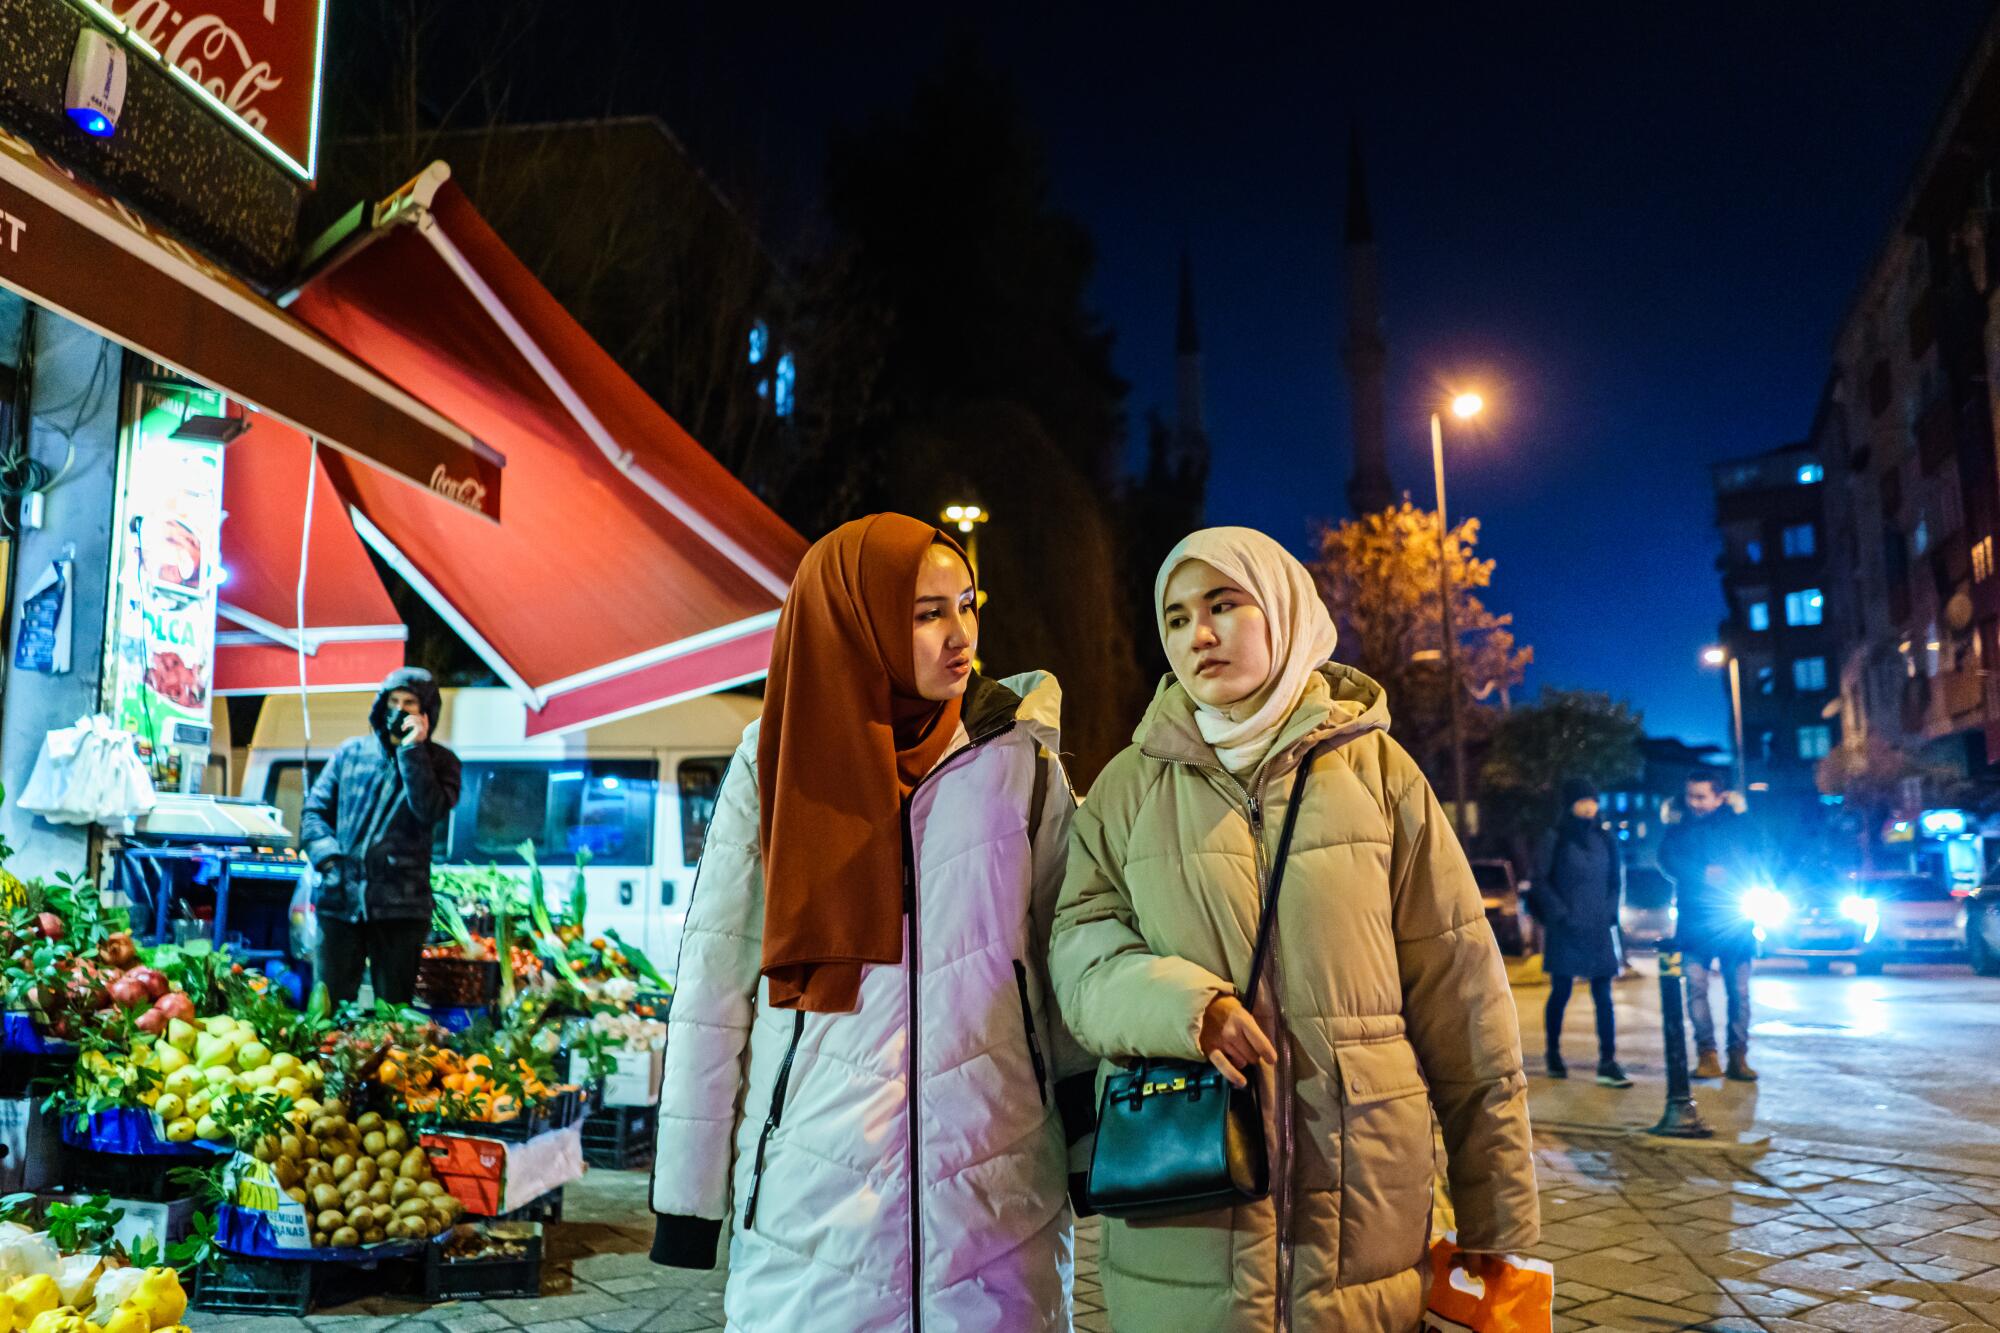 Two young women in head coverings and puffer coats walk past a produce stand on a street 